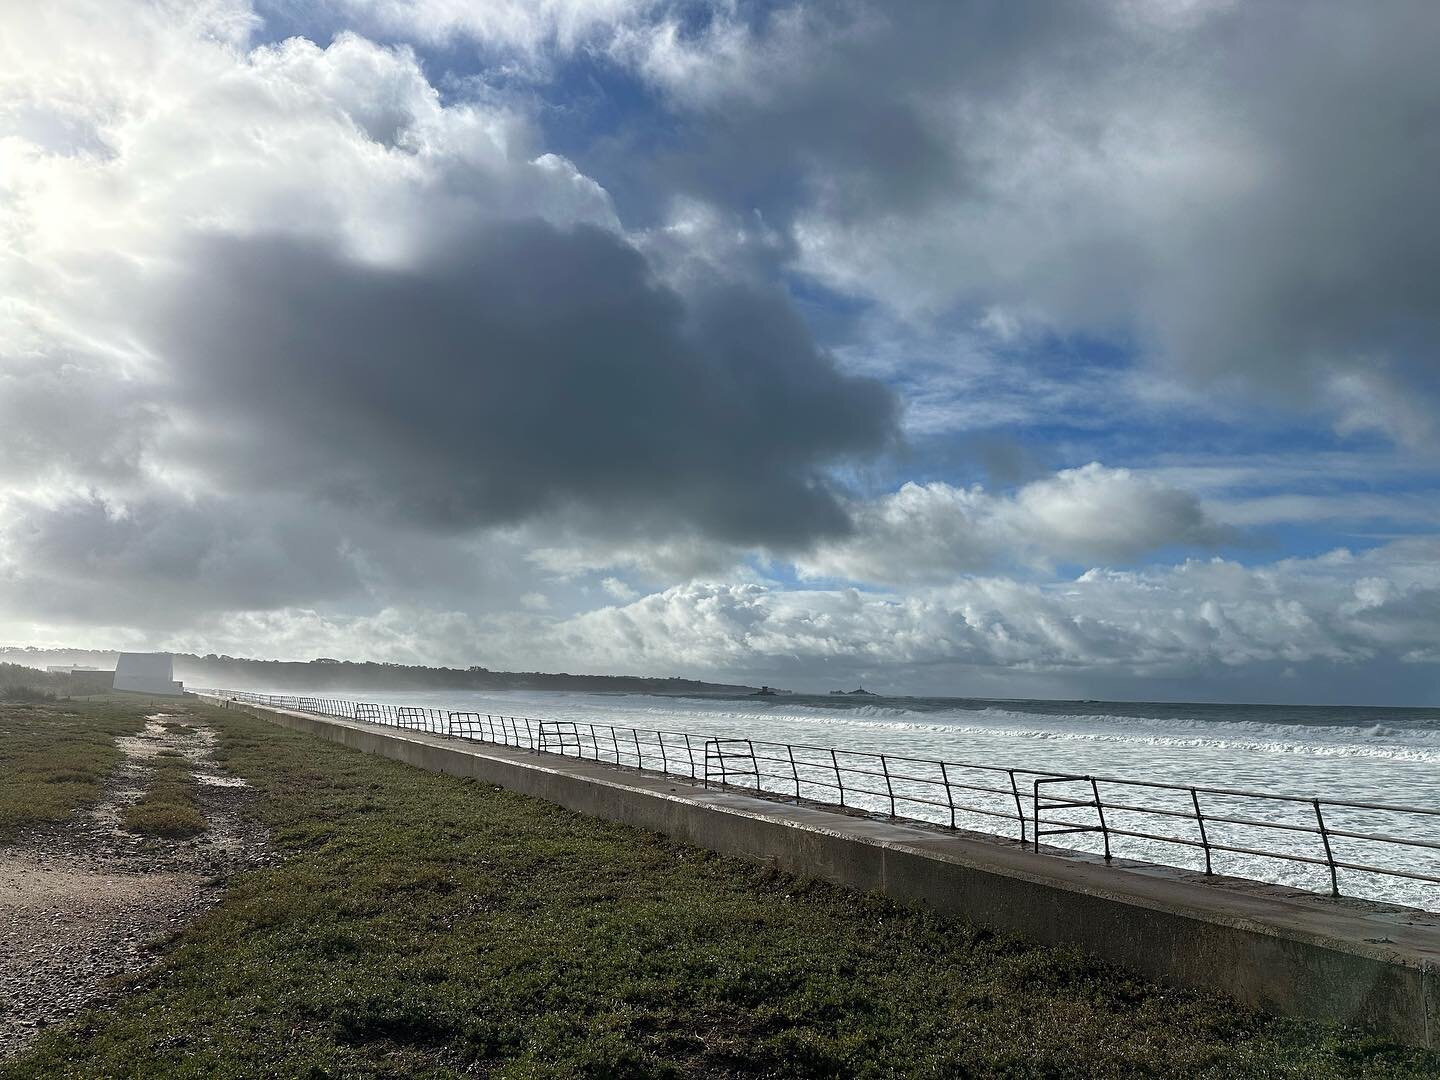 Post-storm Ciar&agrave;n down in st Ouen&rsquo;s bay.

It&rsquo;s not been as badly hit as the east and south of the island, possibly thanks to high WW2 sea wall, fewer coastal structures and obviously its distance from the tornado. 

Much damage els